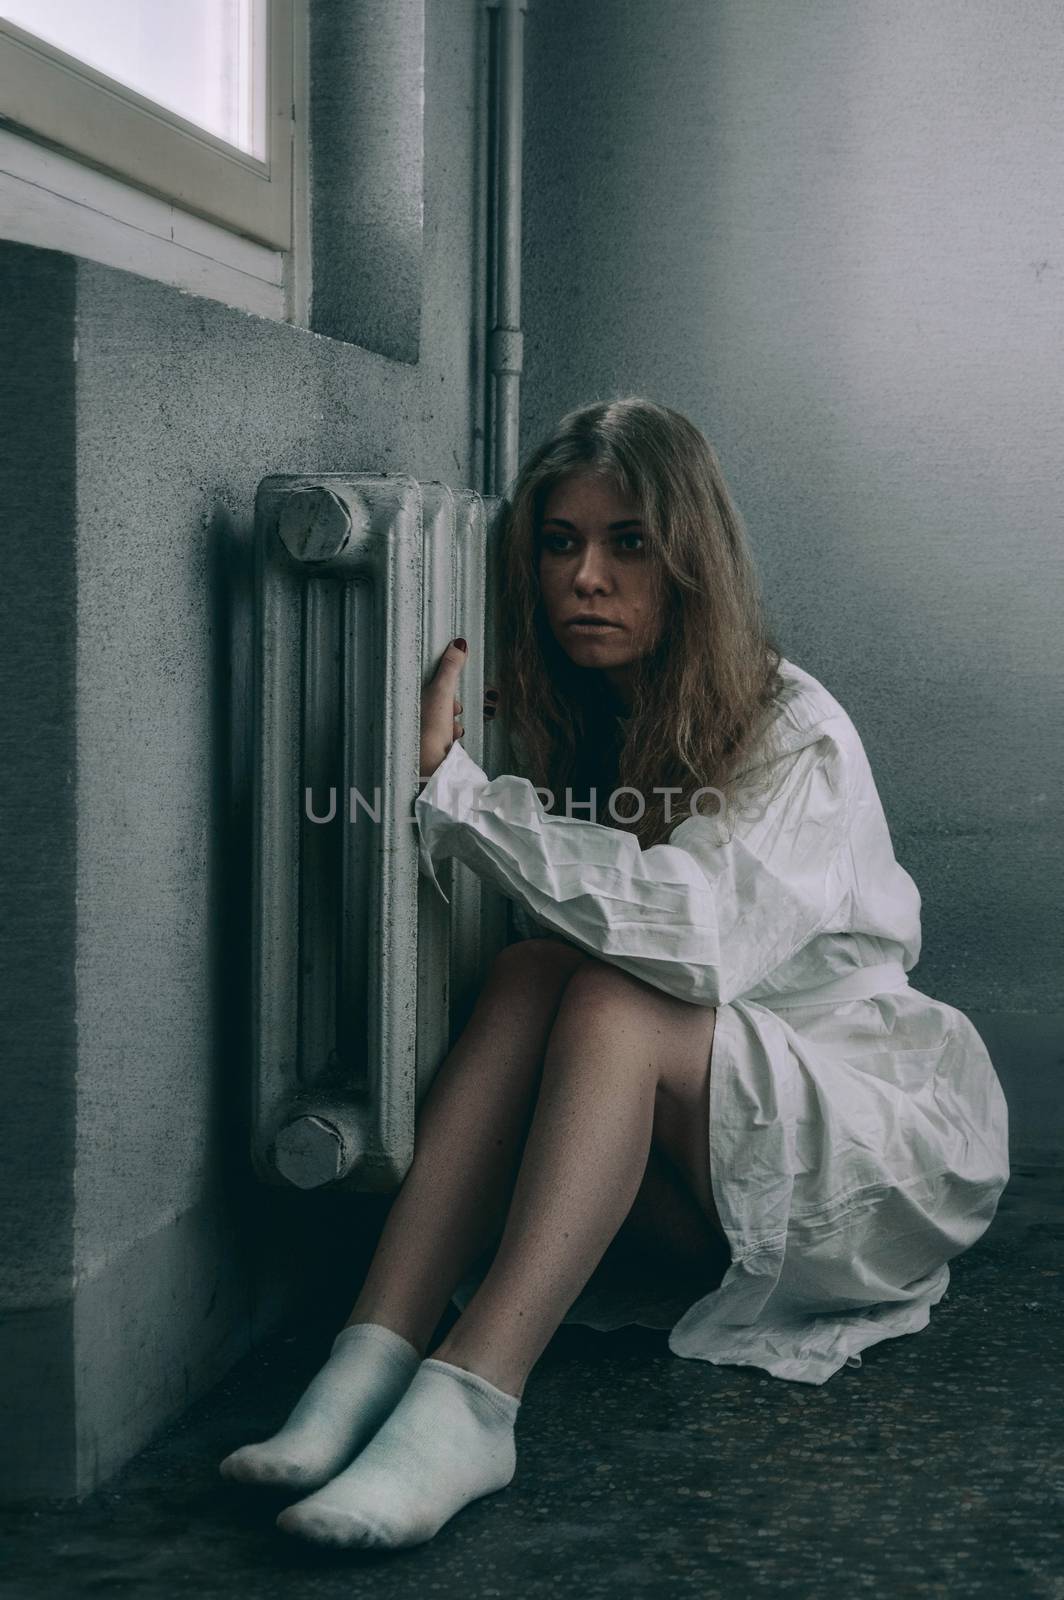 mentally ill girlwith a straitjacket in a Psychiatric